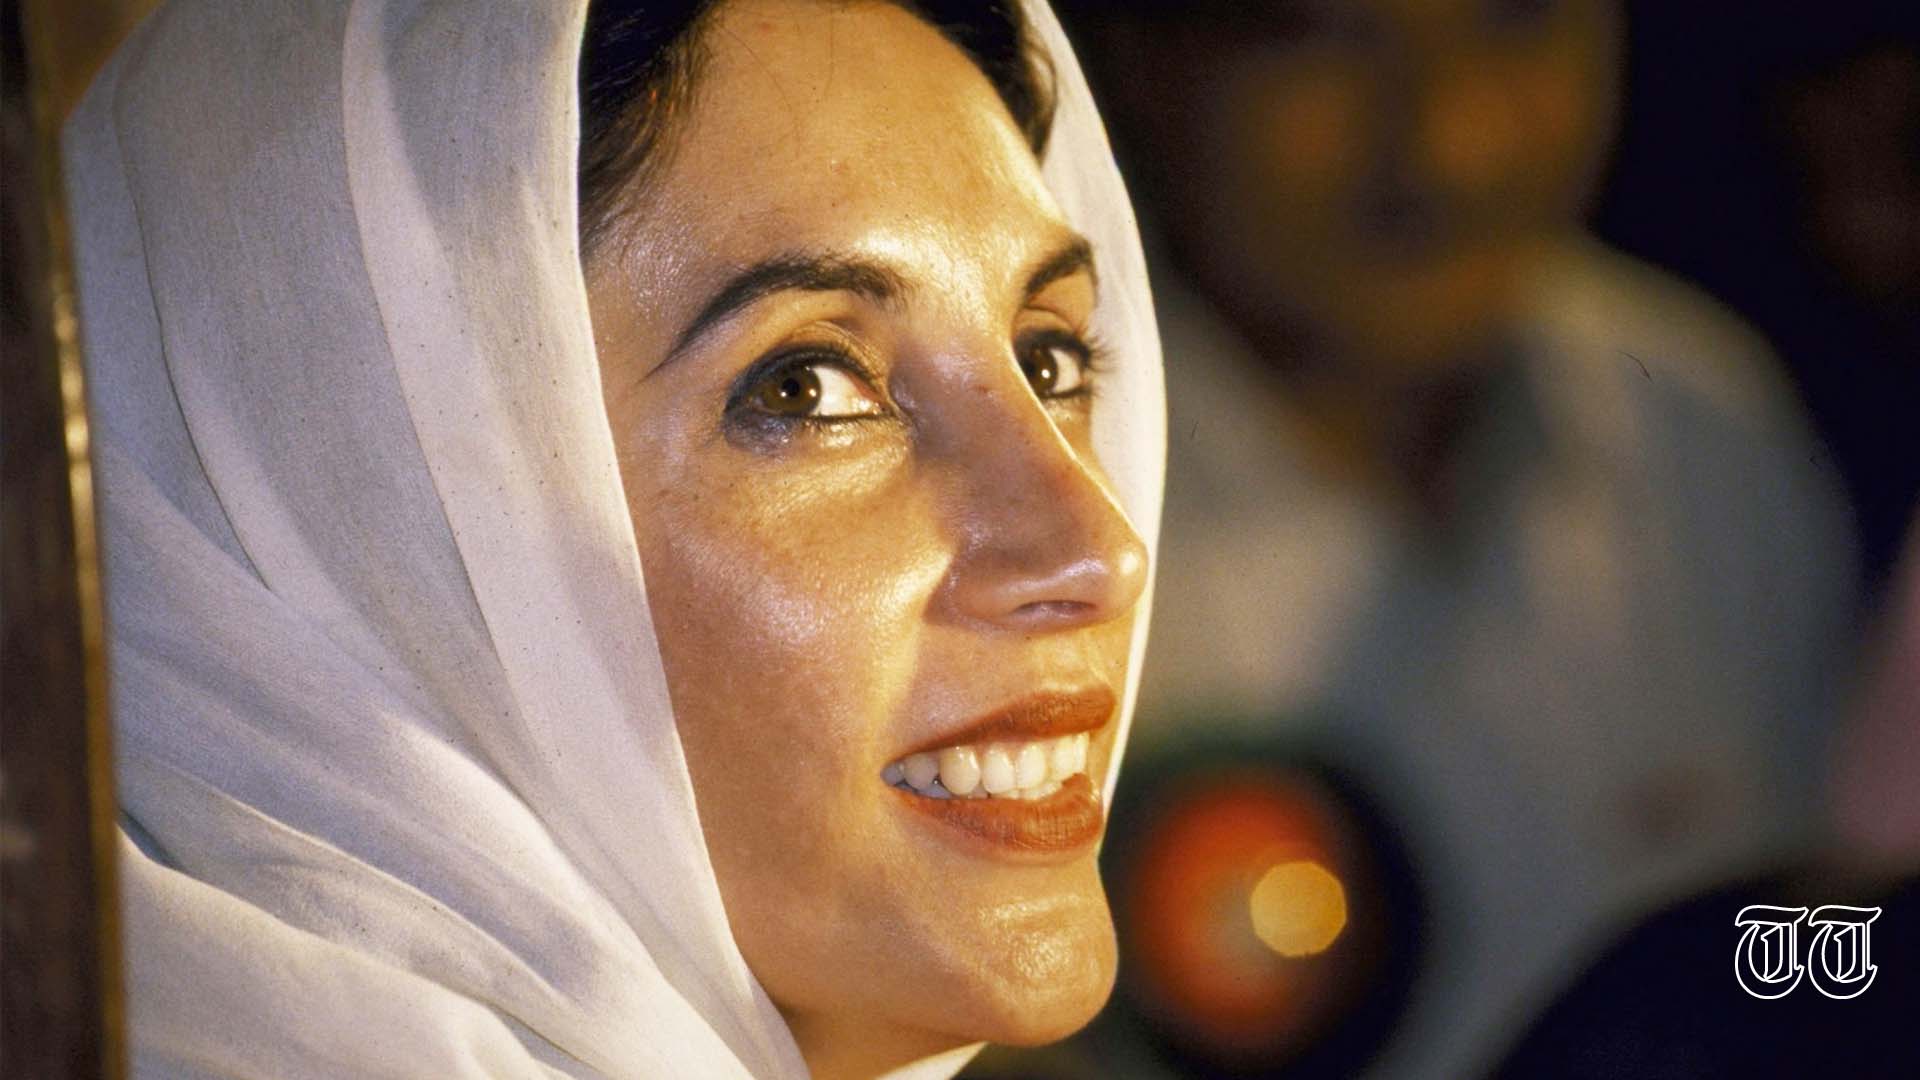 A file photo is shown of former prime minister Benazir Bhutto in 1993.